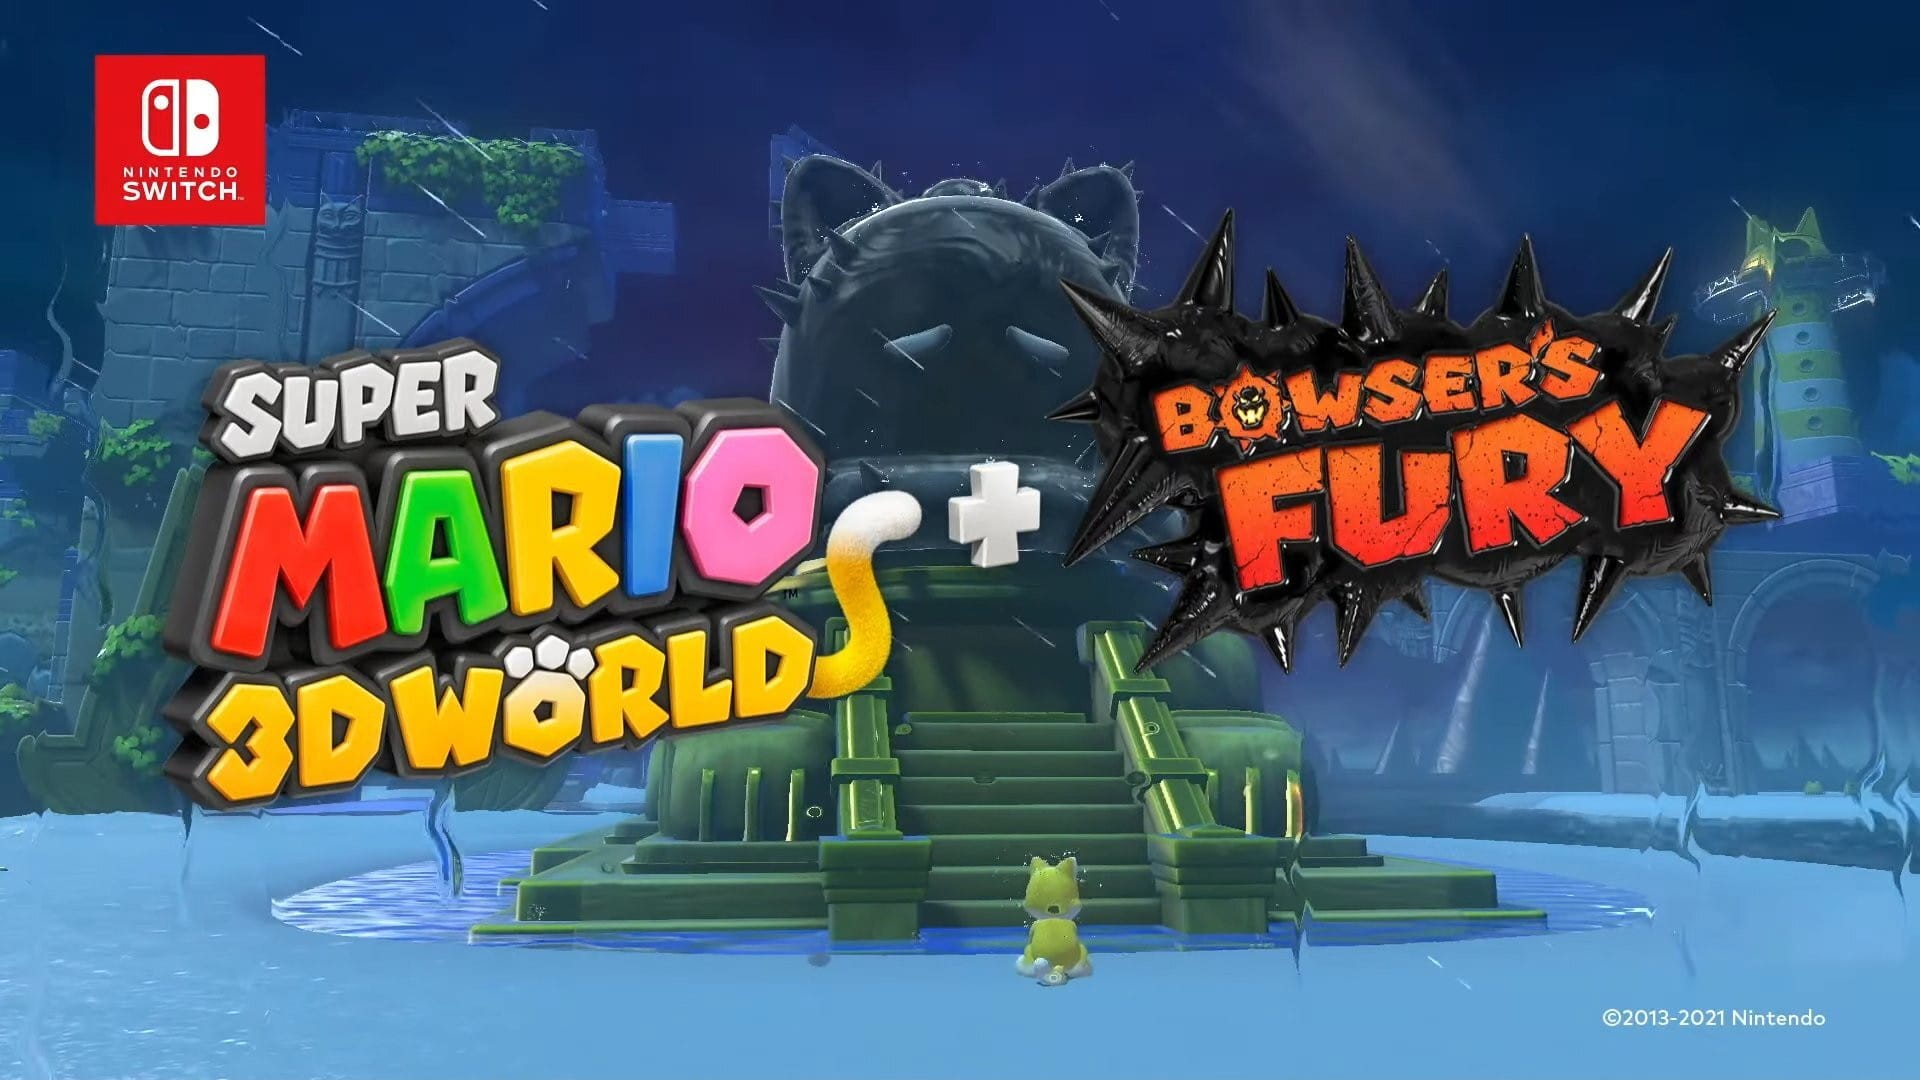 Super Mario 3D World + Bowser's Fury - Overview Trailer - Nintendo Switch 